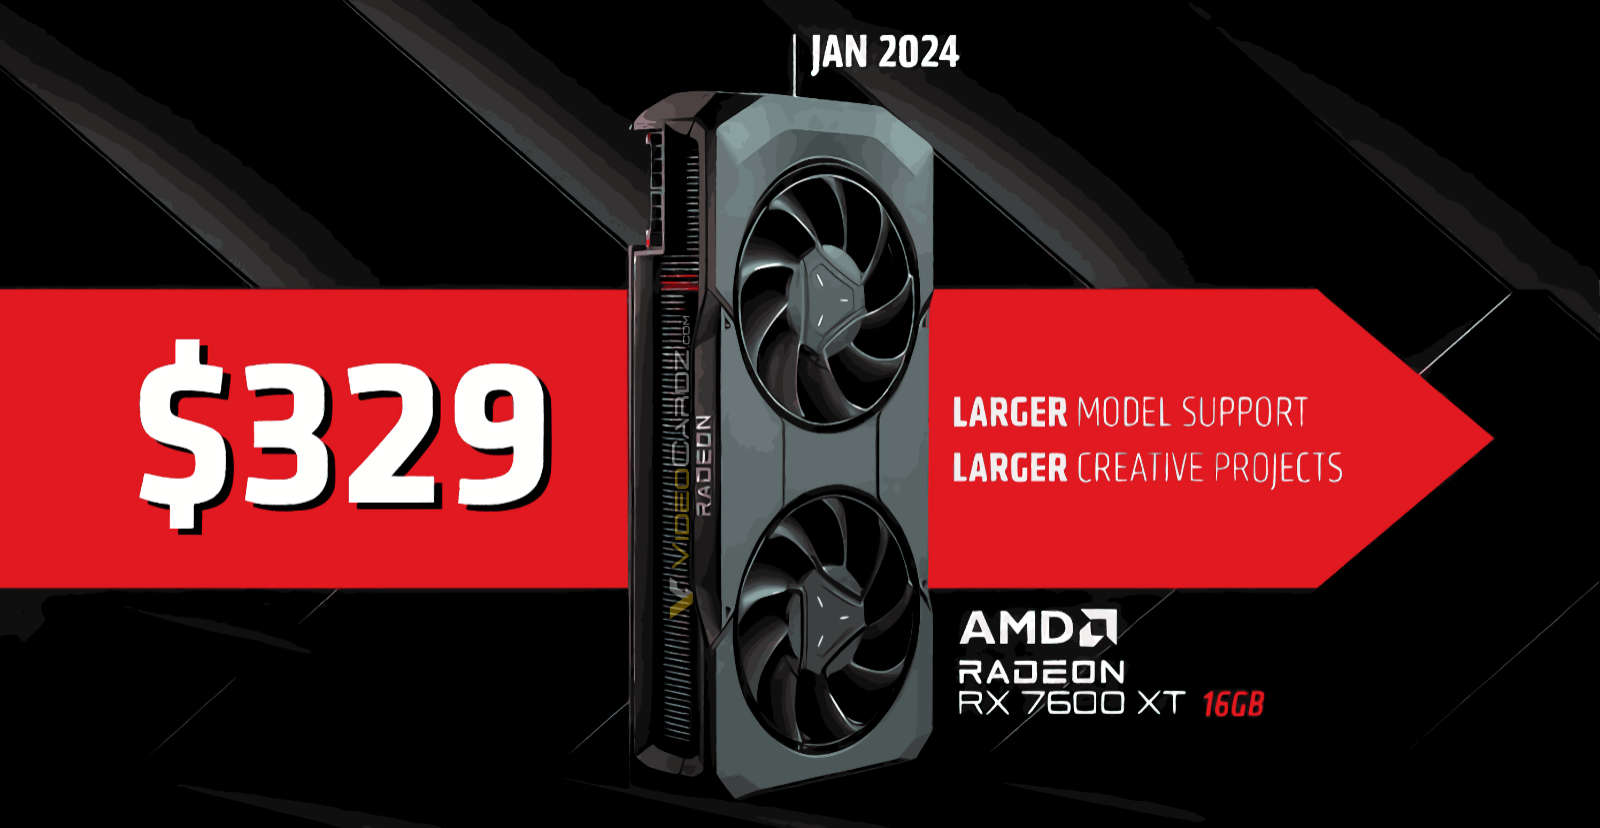 AMD Radeon RX 7600 XT with 16 GB of memory will be released on January 24 at a price of $329